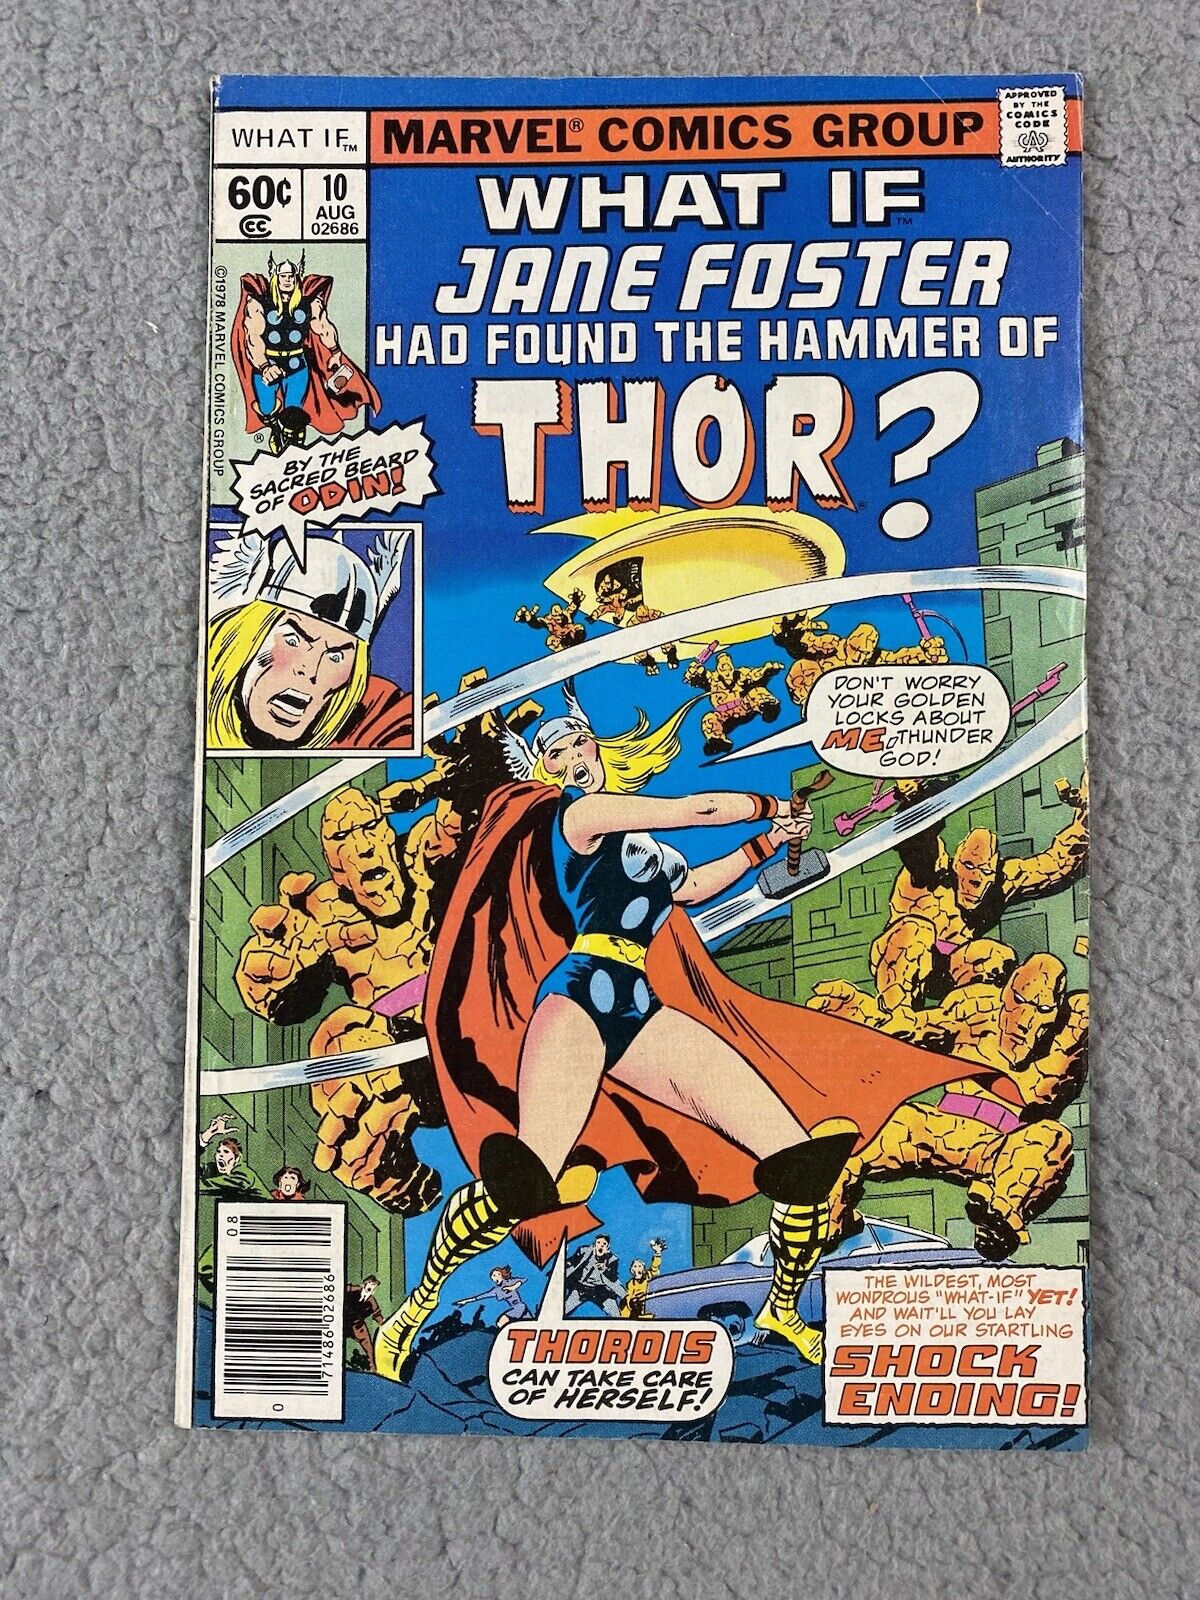 What If? #10 1st Jane Foster as Thor MCU Raw Copy 1978 KEY ISSUE Thordis Marvel